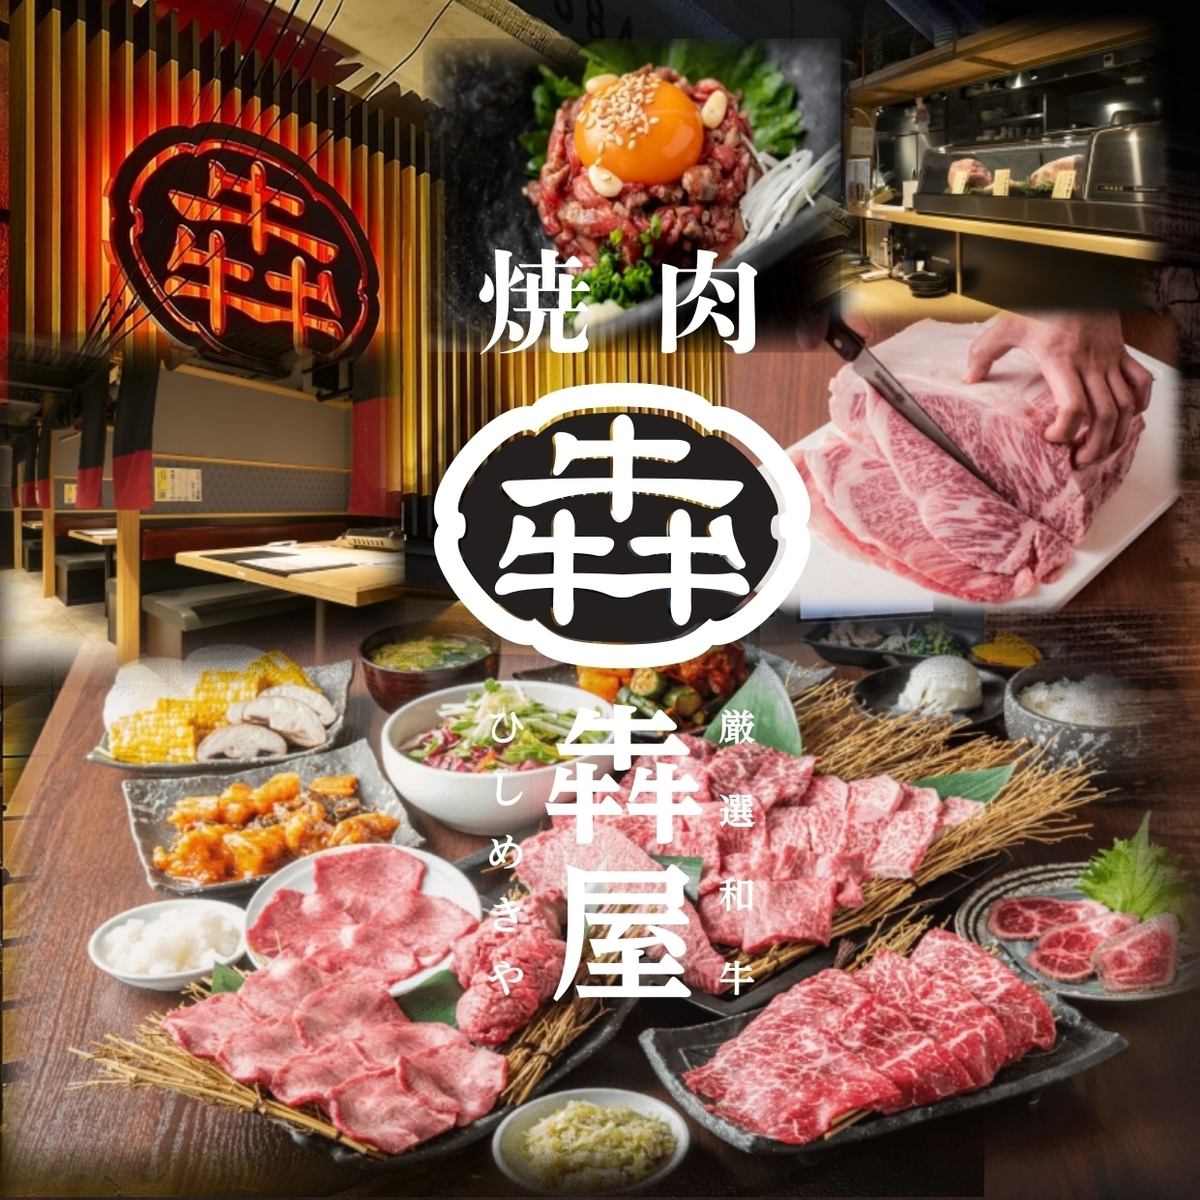 We offer pure domestically produced Japanese black beef that is purchased directly with careful preparation!